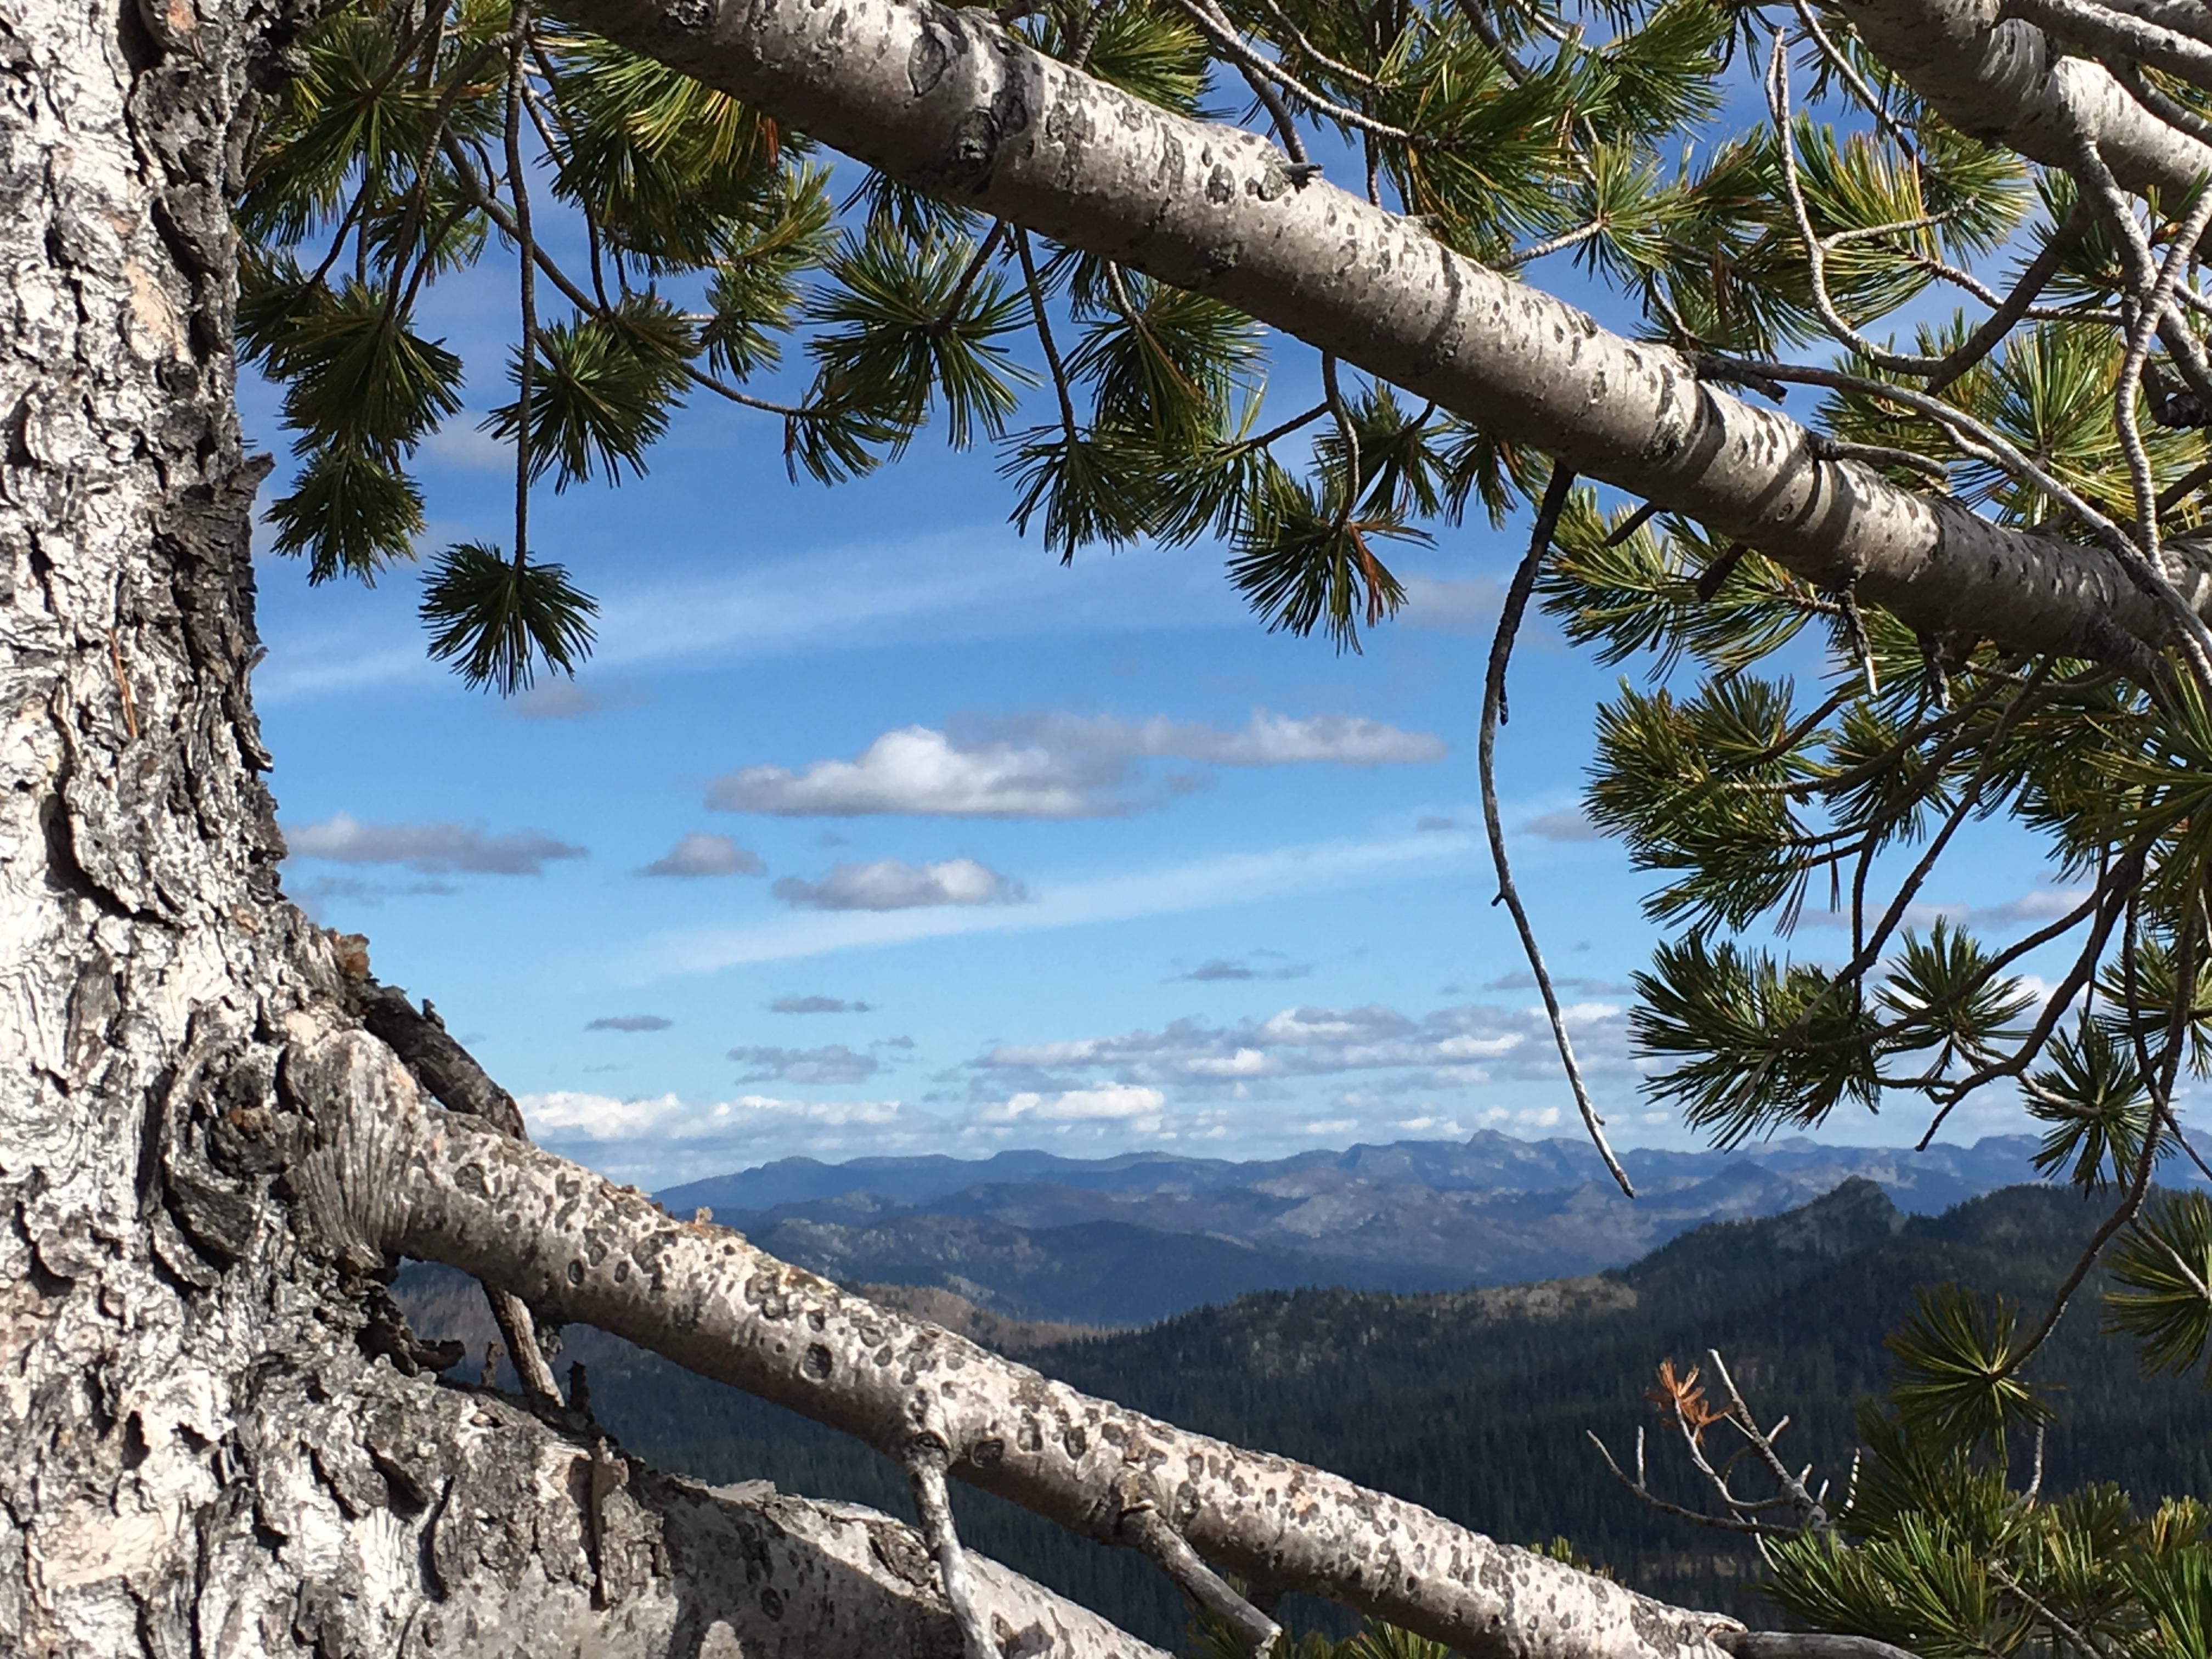 Whitebark pine plays several important roles in high elevation ecosystems.